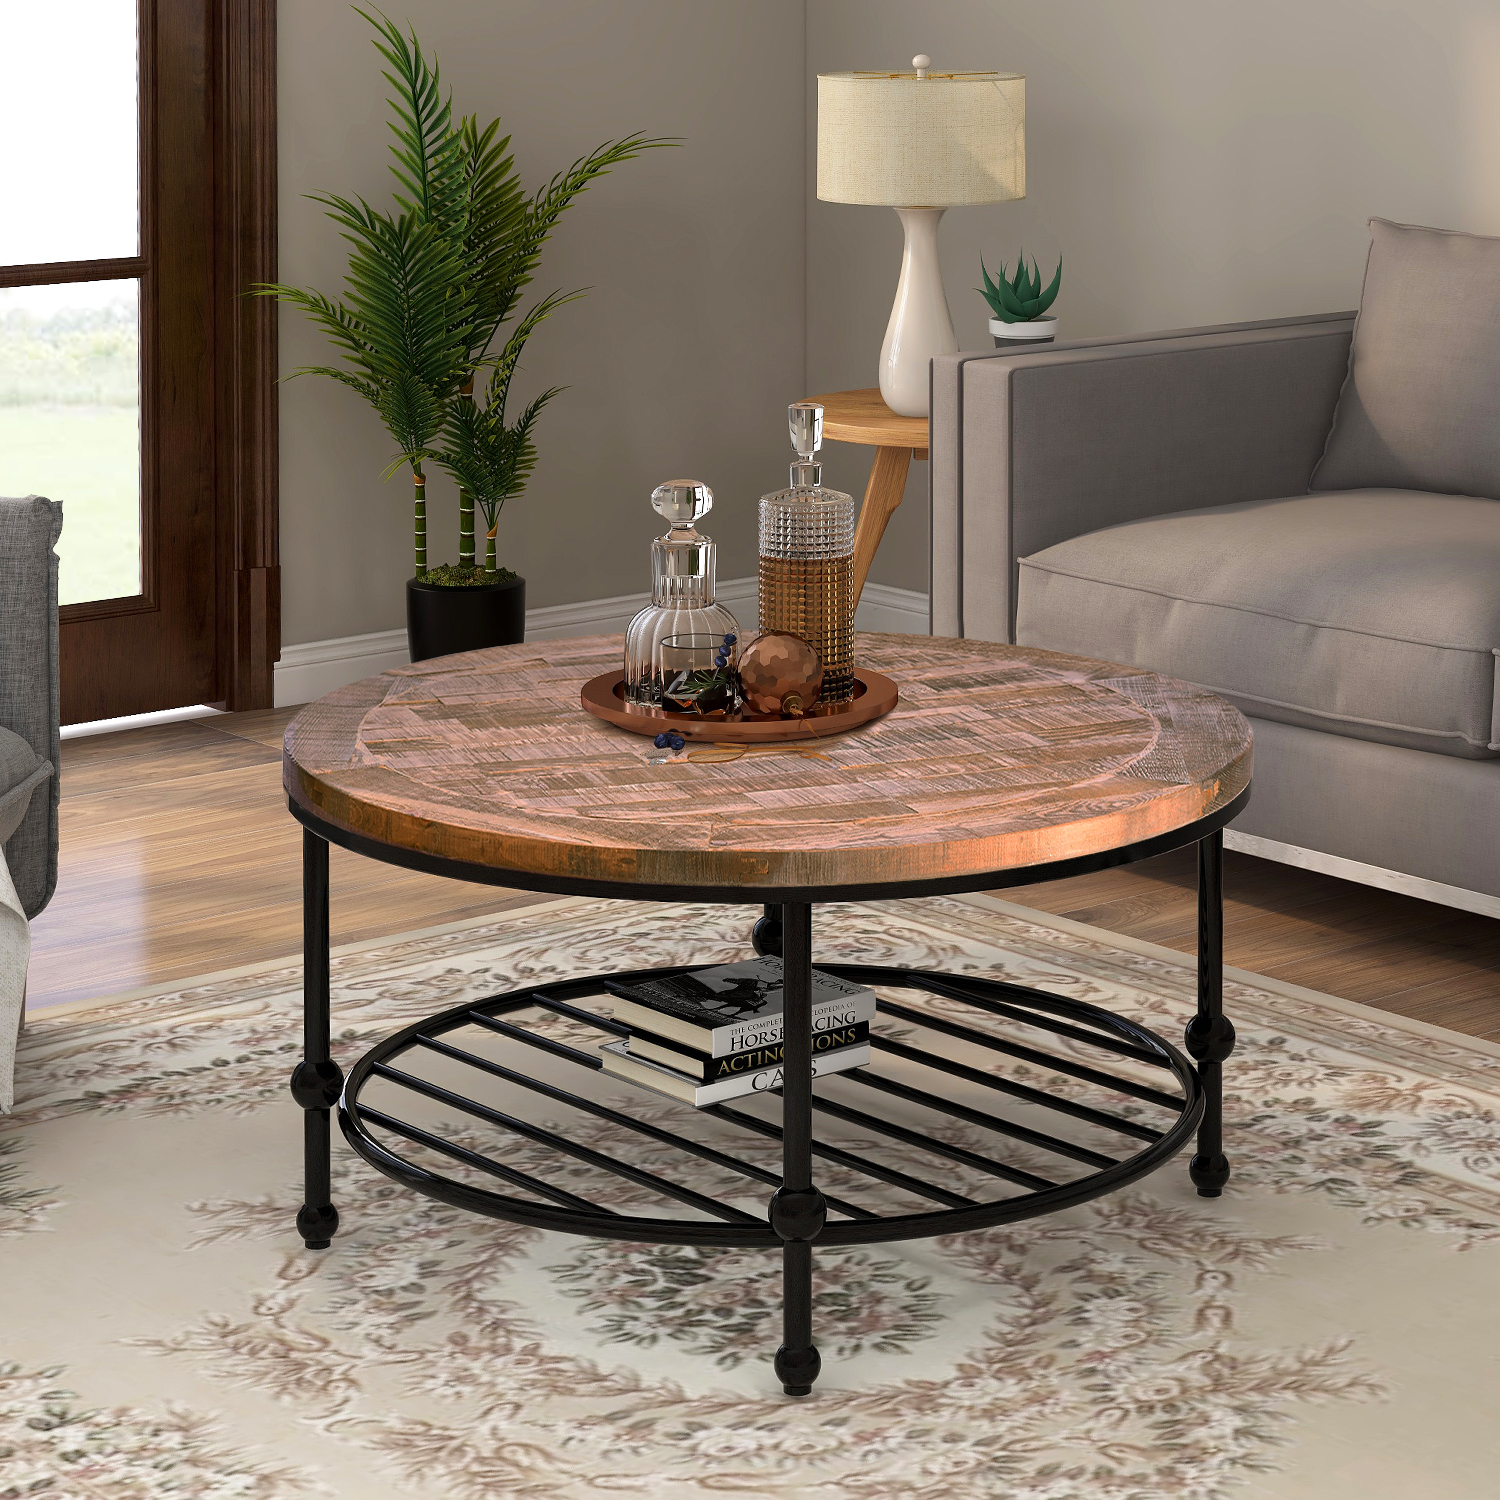 Round Rustic Natural Coffee Table With Storage Shelf - WF192554AAD